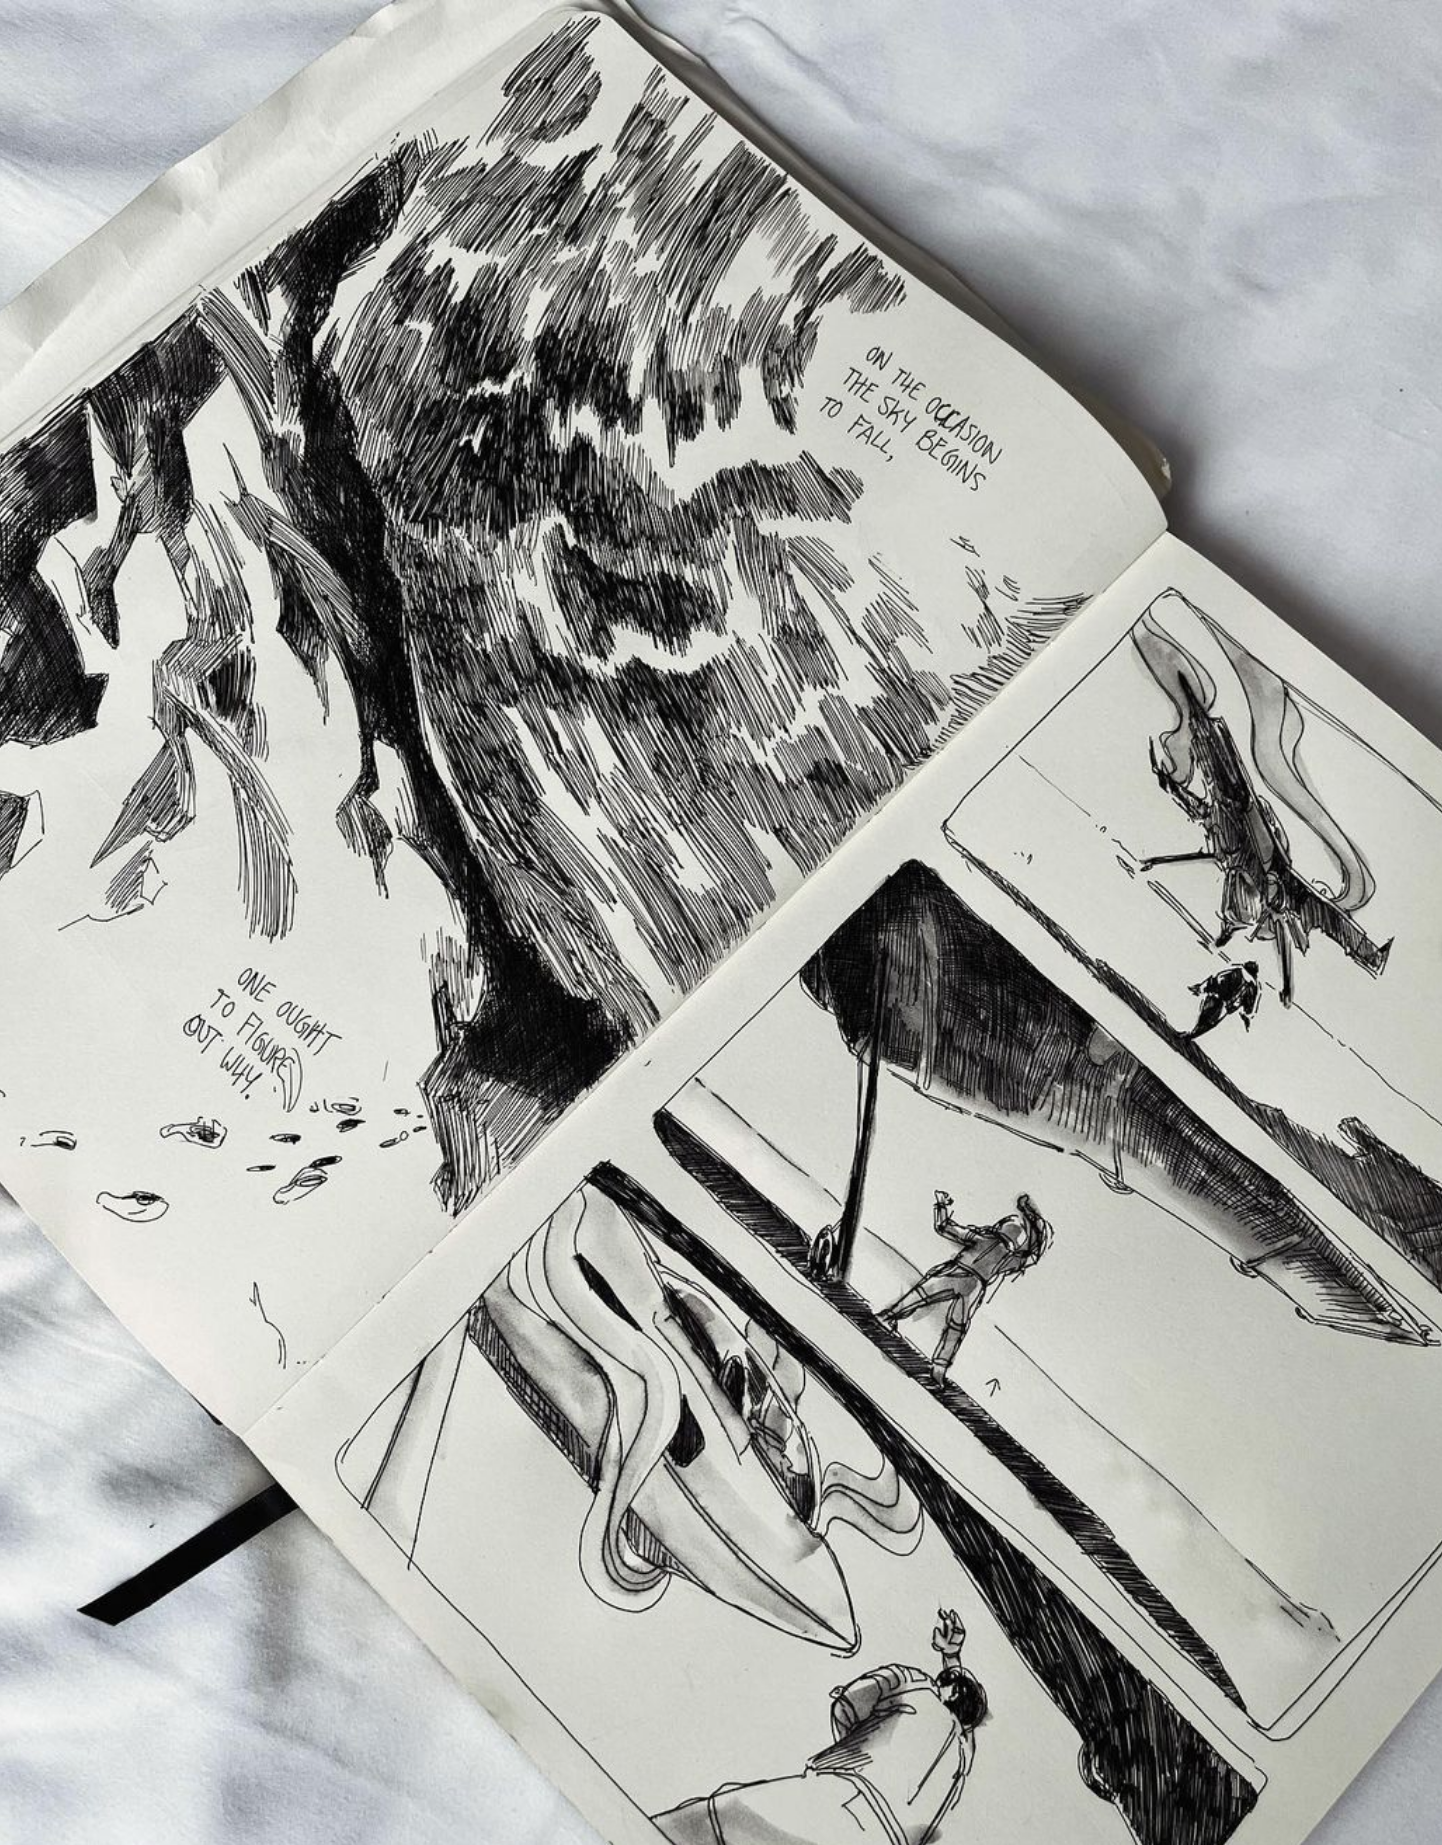 Two pages of a sketchbook filled with illustrations for a graphic novel.